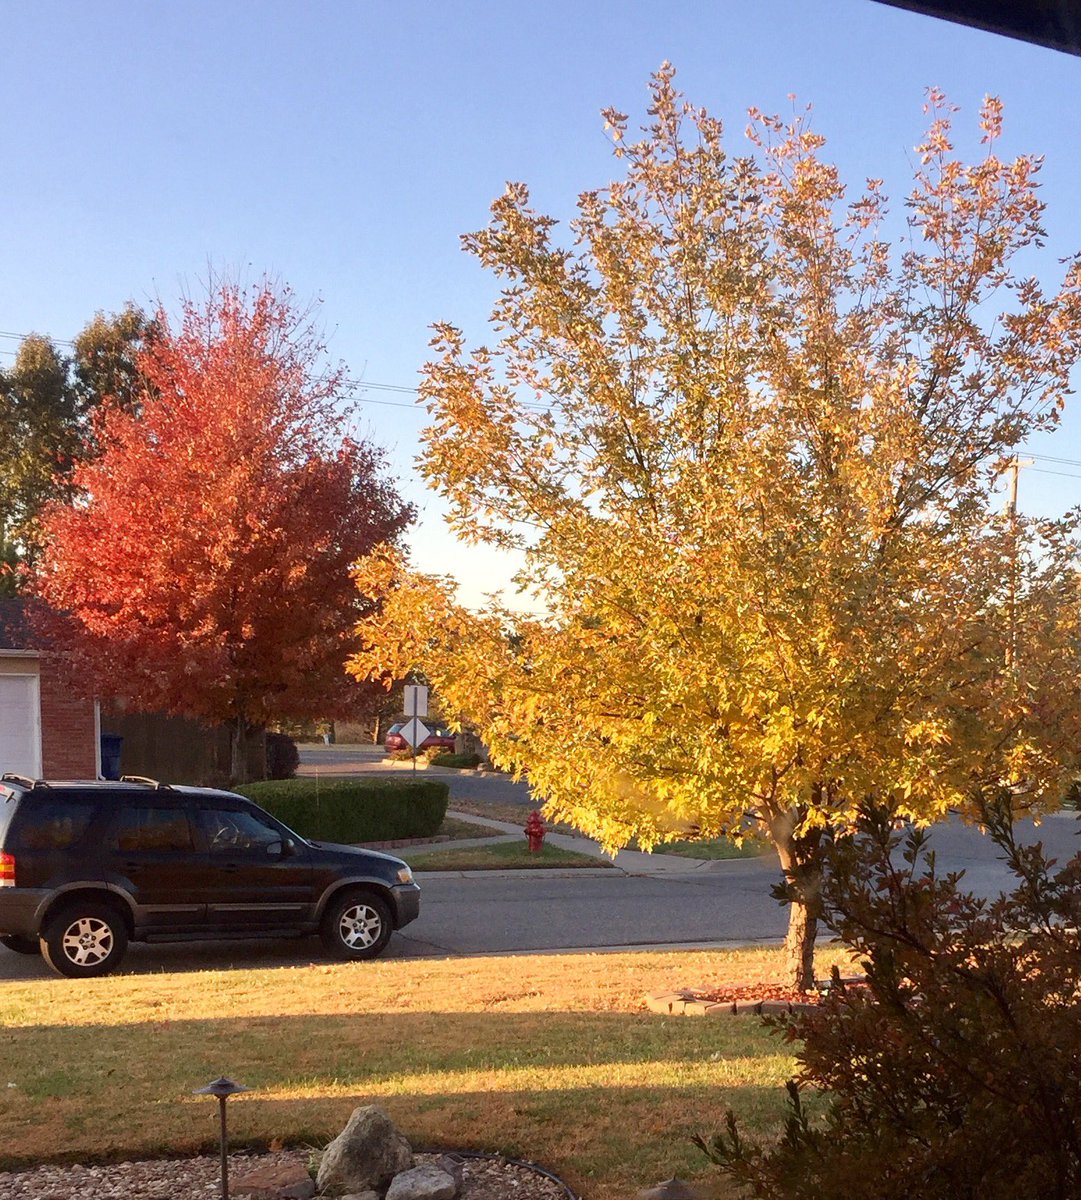 I so love this time of year!!!🍁🍂🍁🍂#prettytrees #beautifulcolors #godsartwork